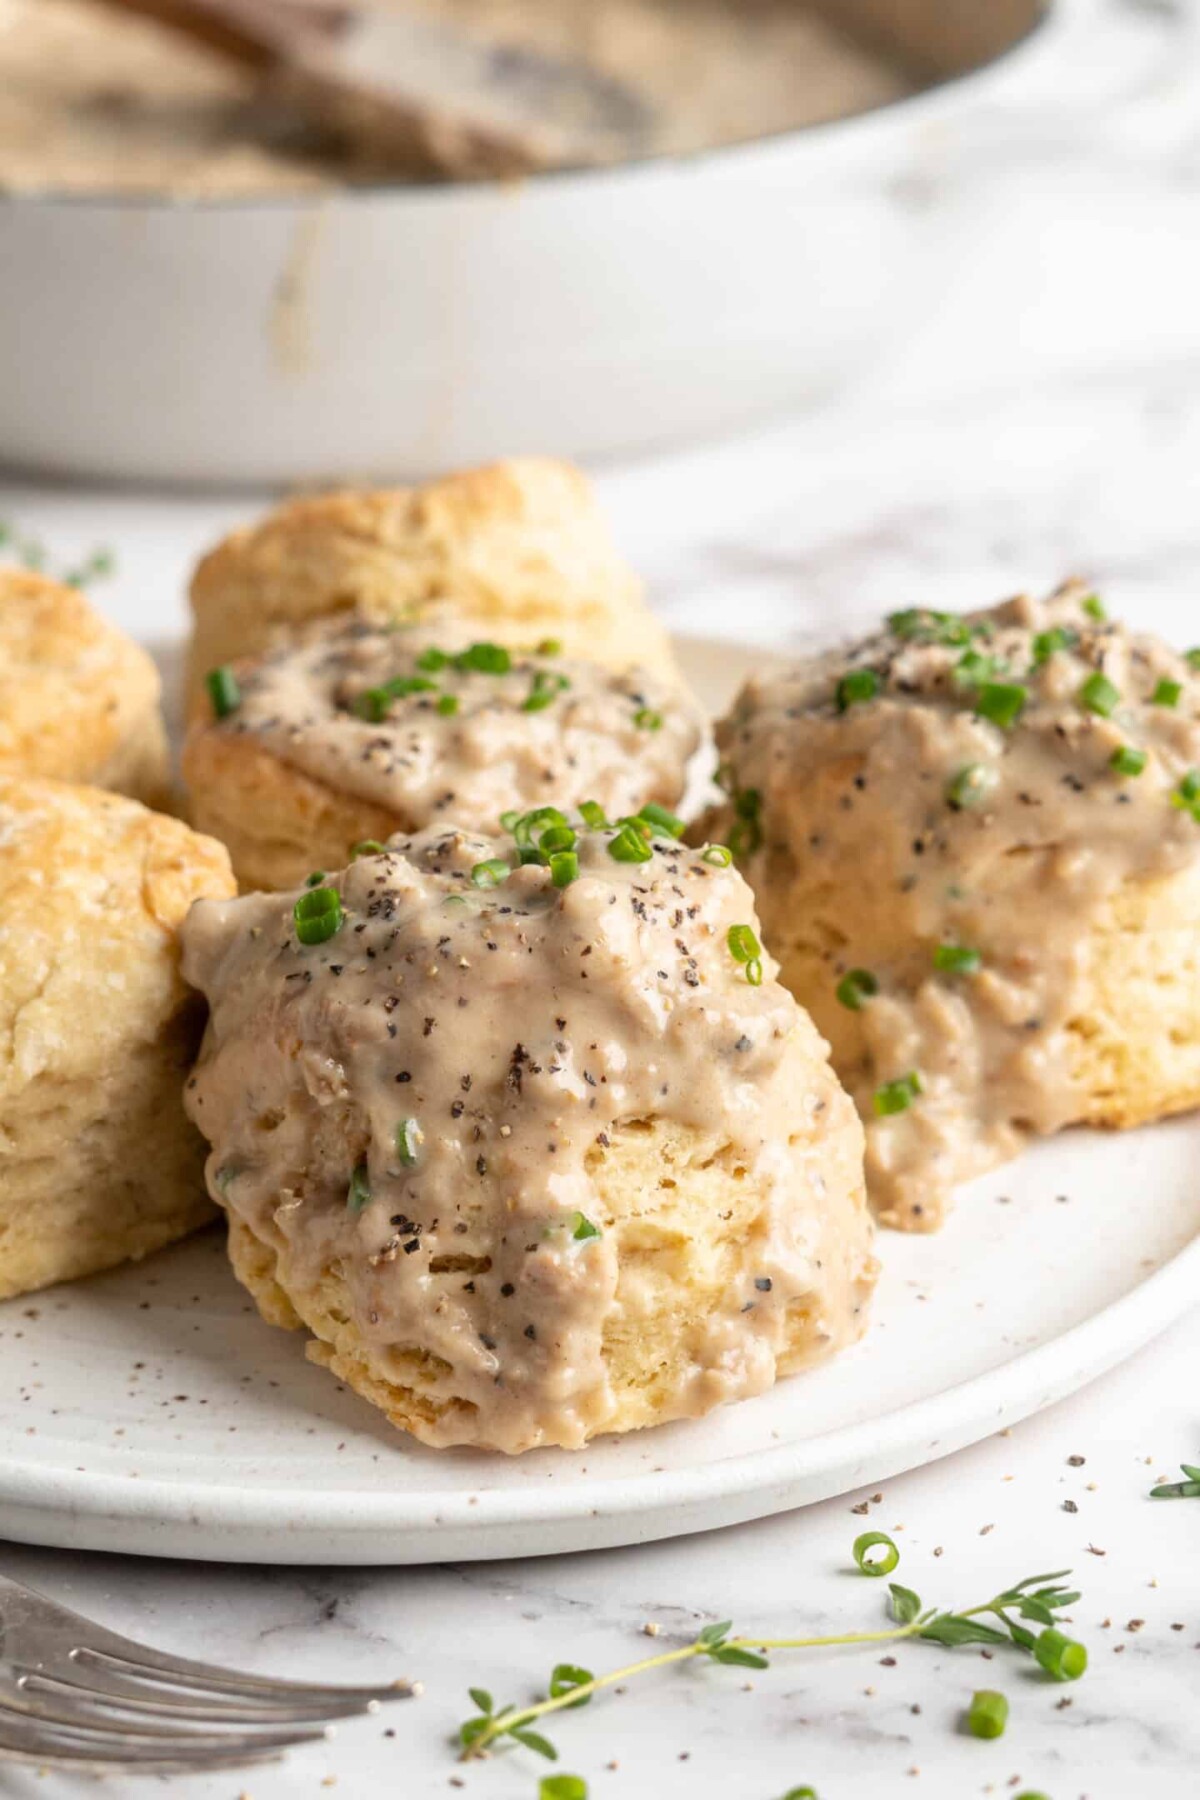 A plate with a few biscuits and gravy on it, garnished with chives